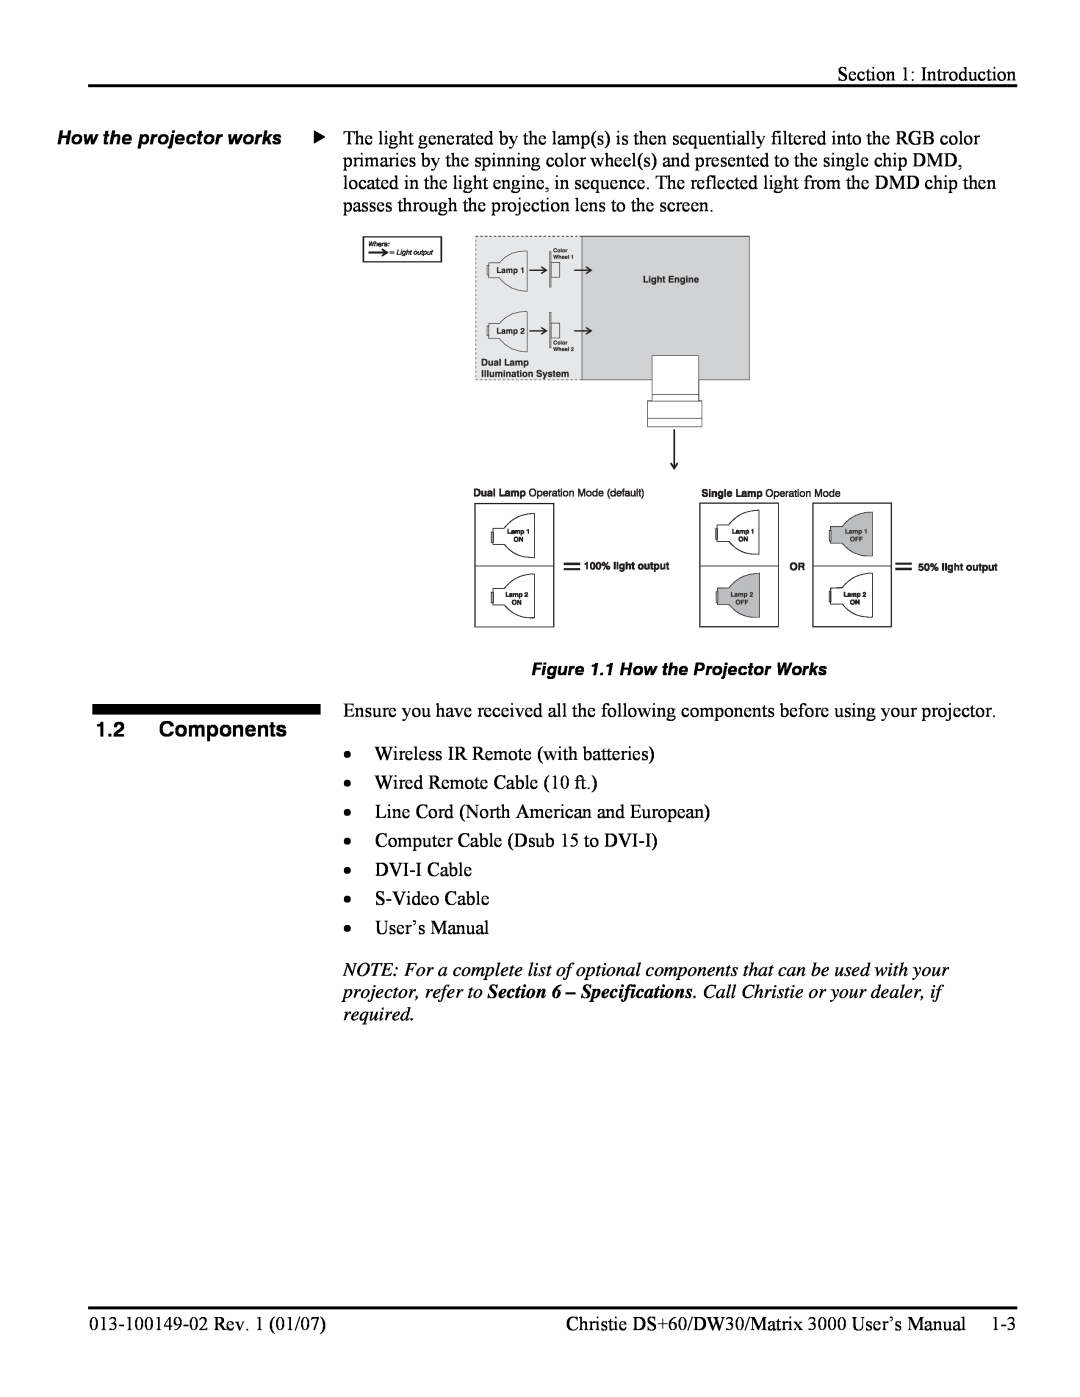 Texas Instruments MATRIX 3000, DW30 user manual Components, 1 How the Projector Works 